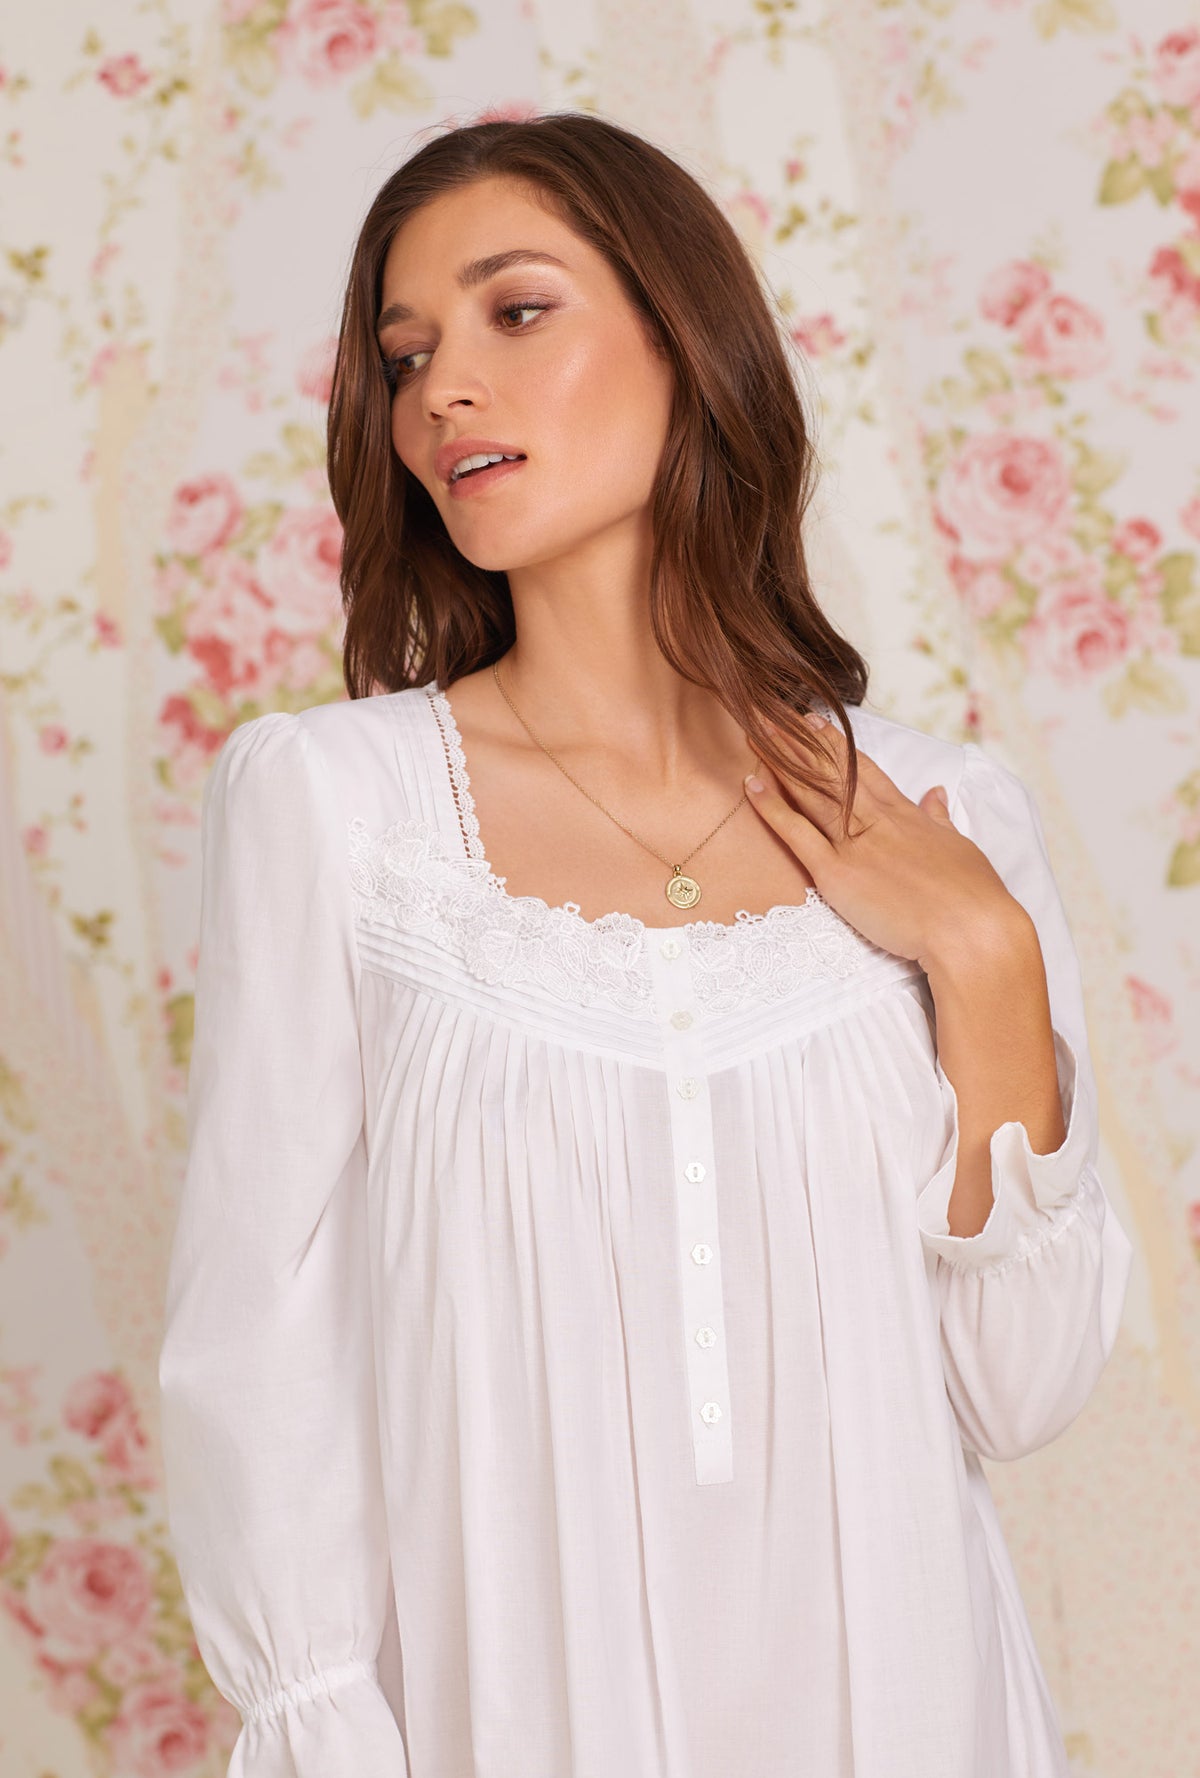 A lady wearing white Long Sleeve Cotton Nightgown with Calla Lily print